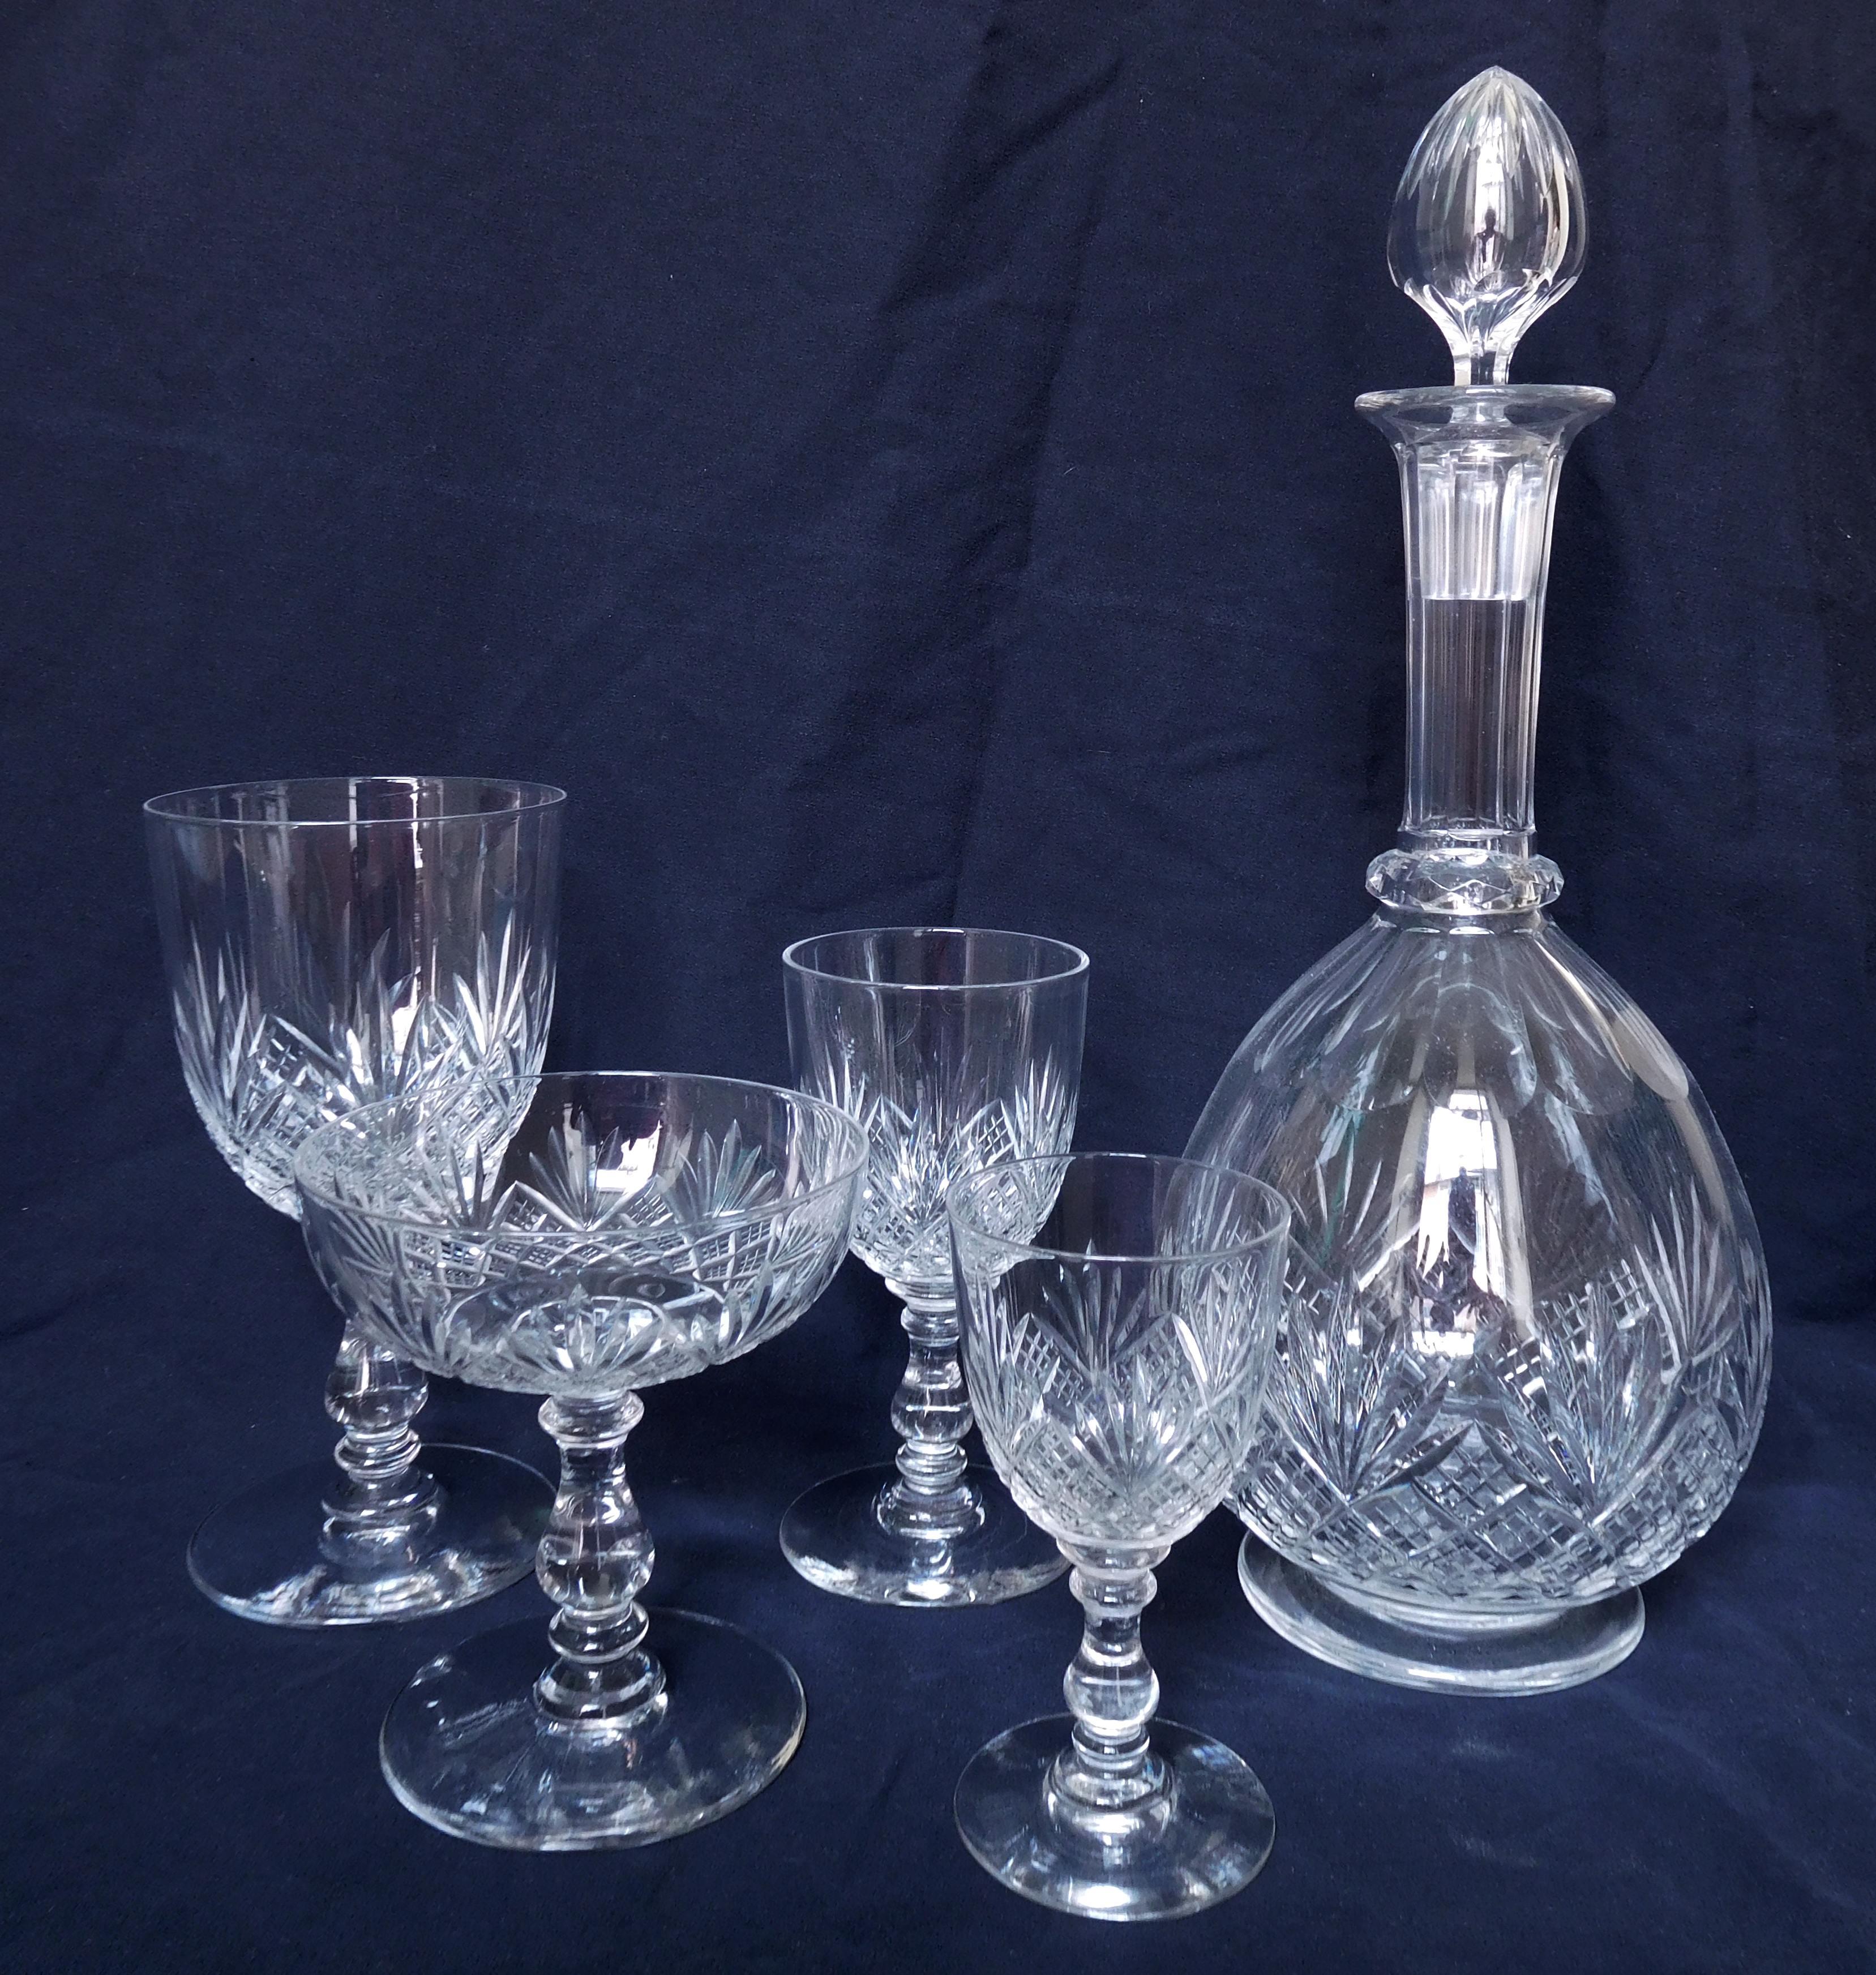 Crystal French antique set of 3 Baccarat crystal glasses - France - Douai model For Sale